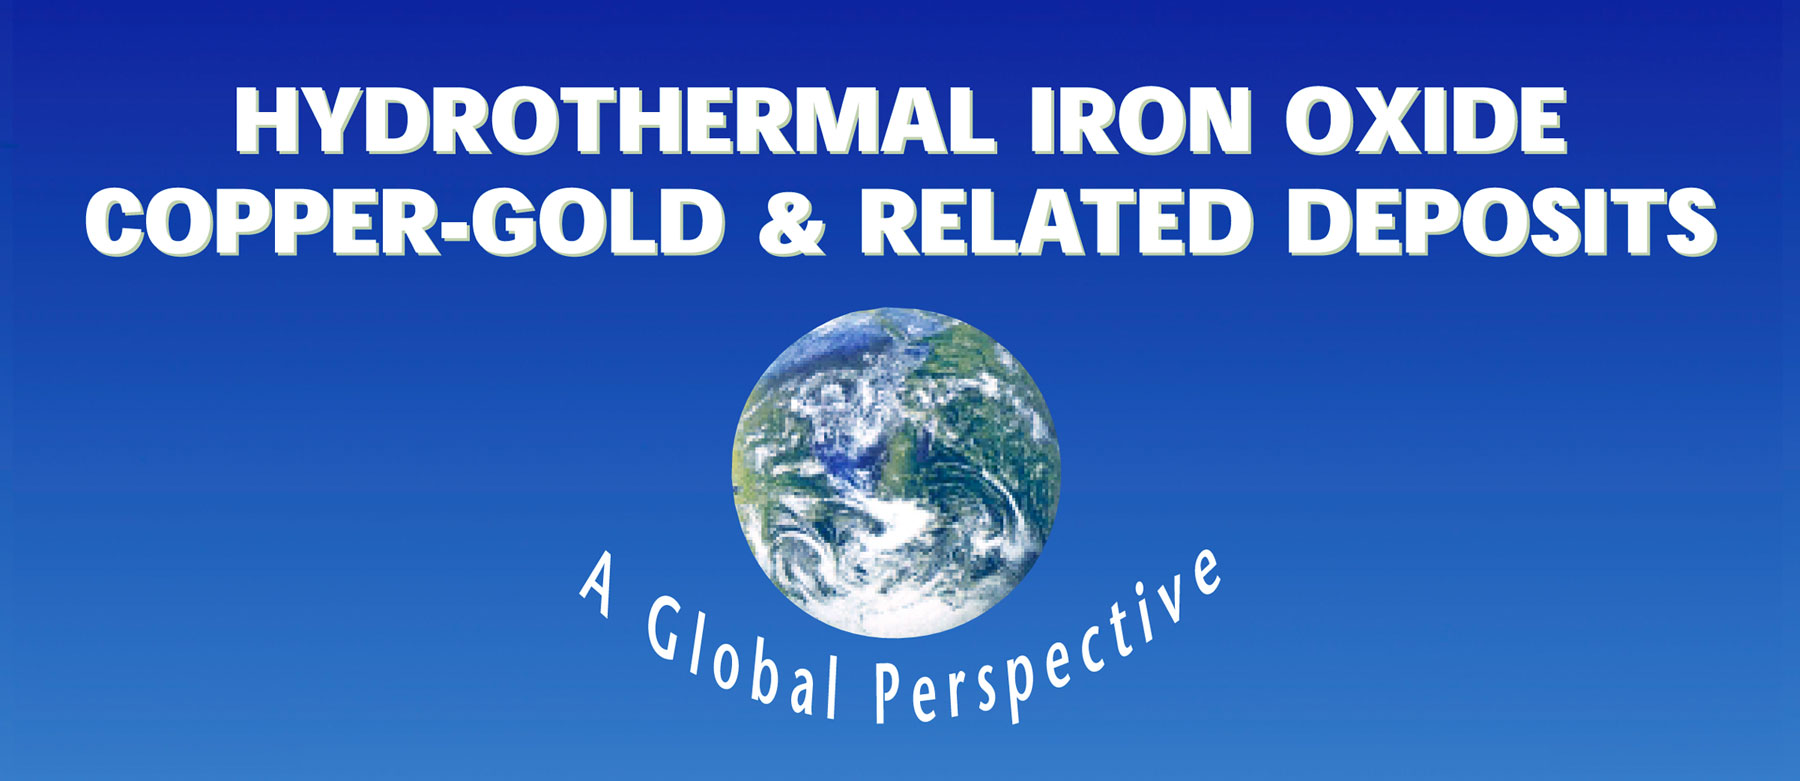 Hydrothermal Iron Oxide Cu-Au and Related Deposits:  A Global Perspective